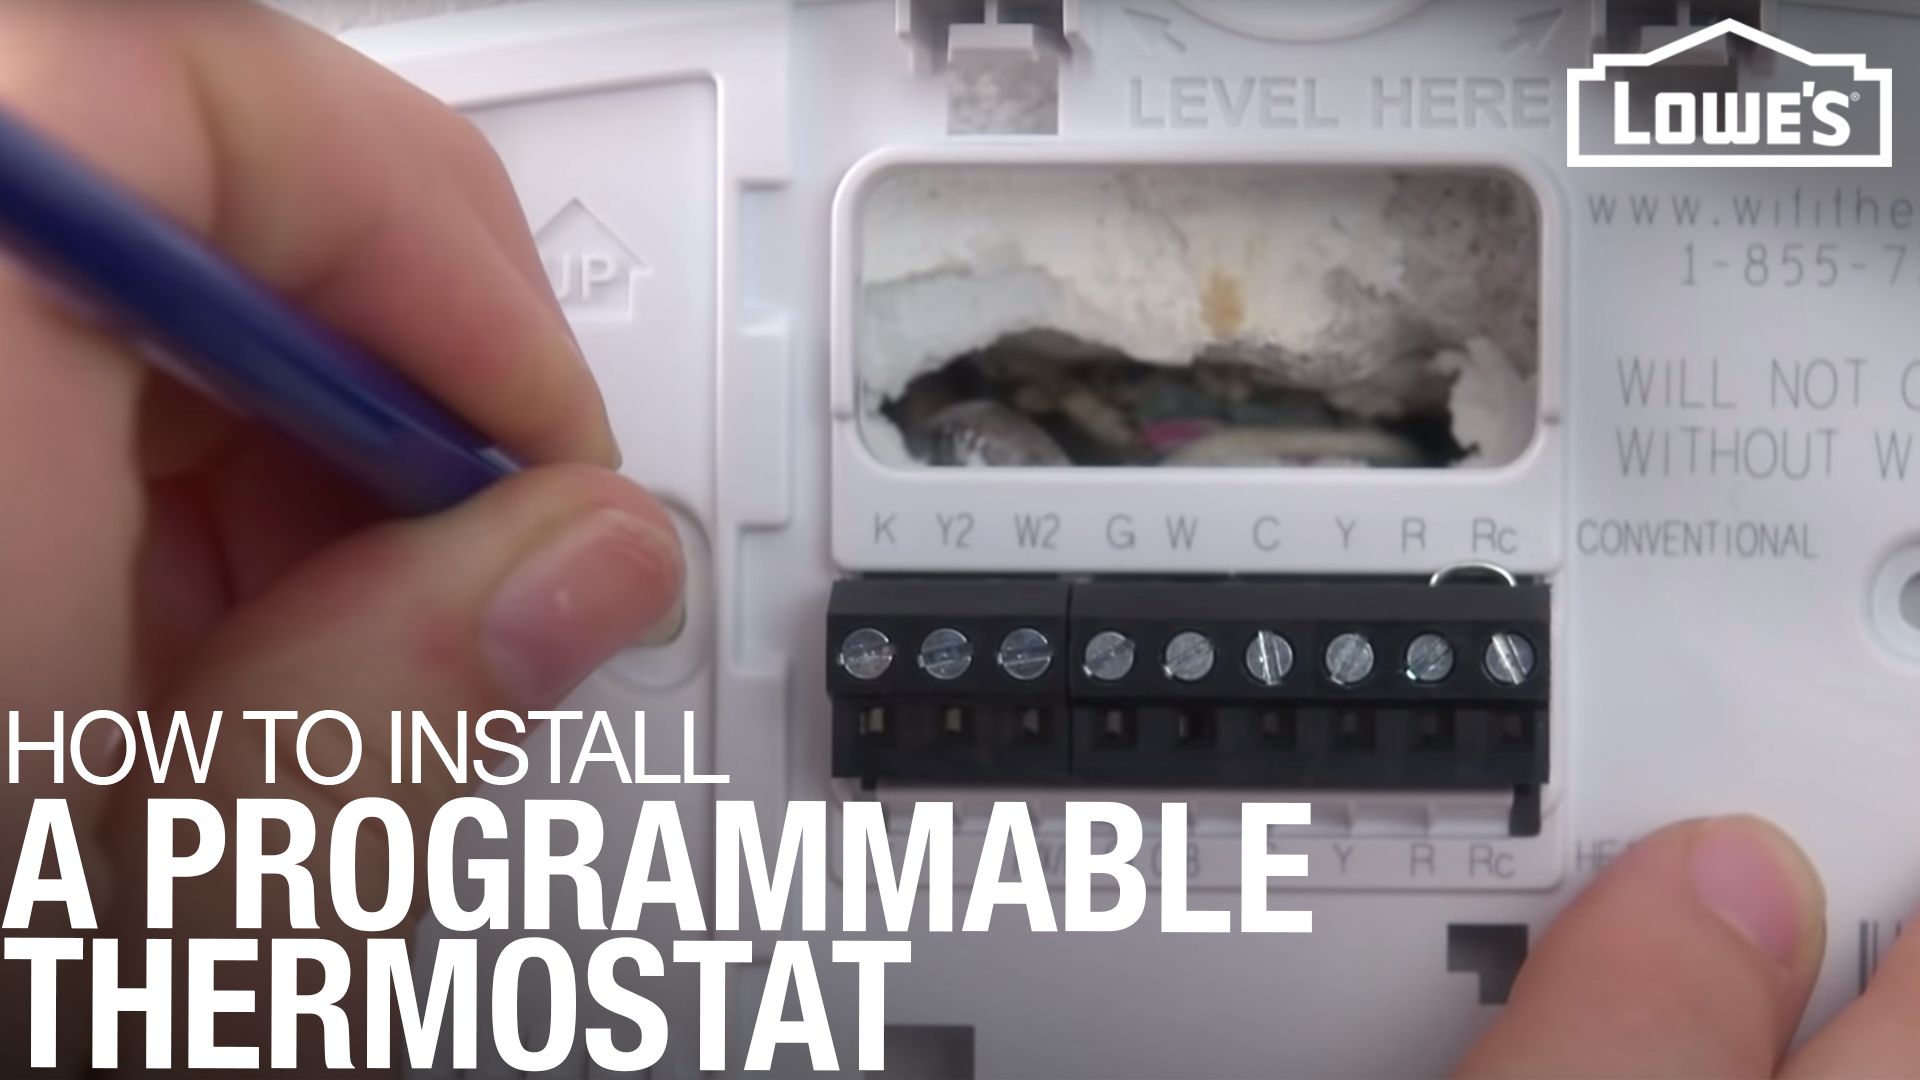 https://mobileimages.lowes.com/marketingimages/92afc119-02eb-4300-8f15-1f3bccc4bbb1/ht-how-to-install-a-programmable-thermostat.jpg